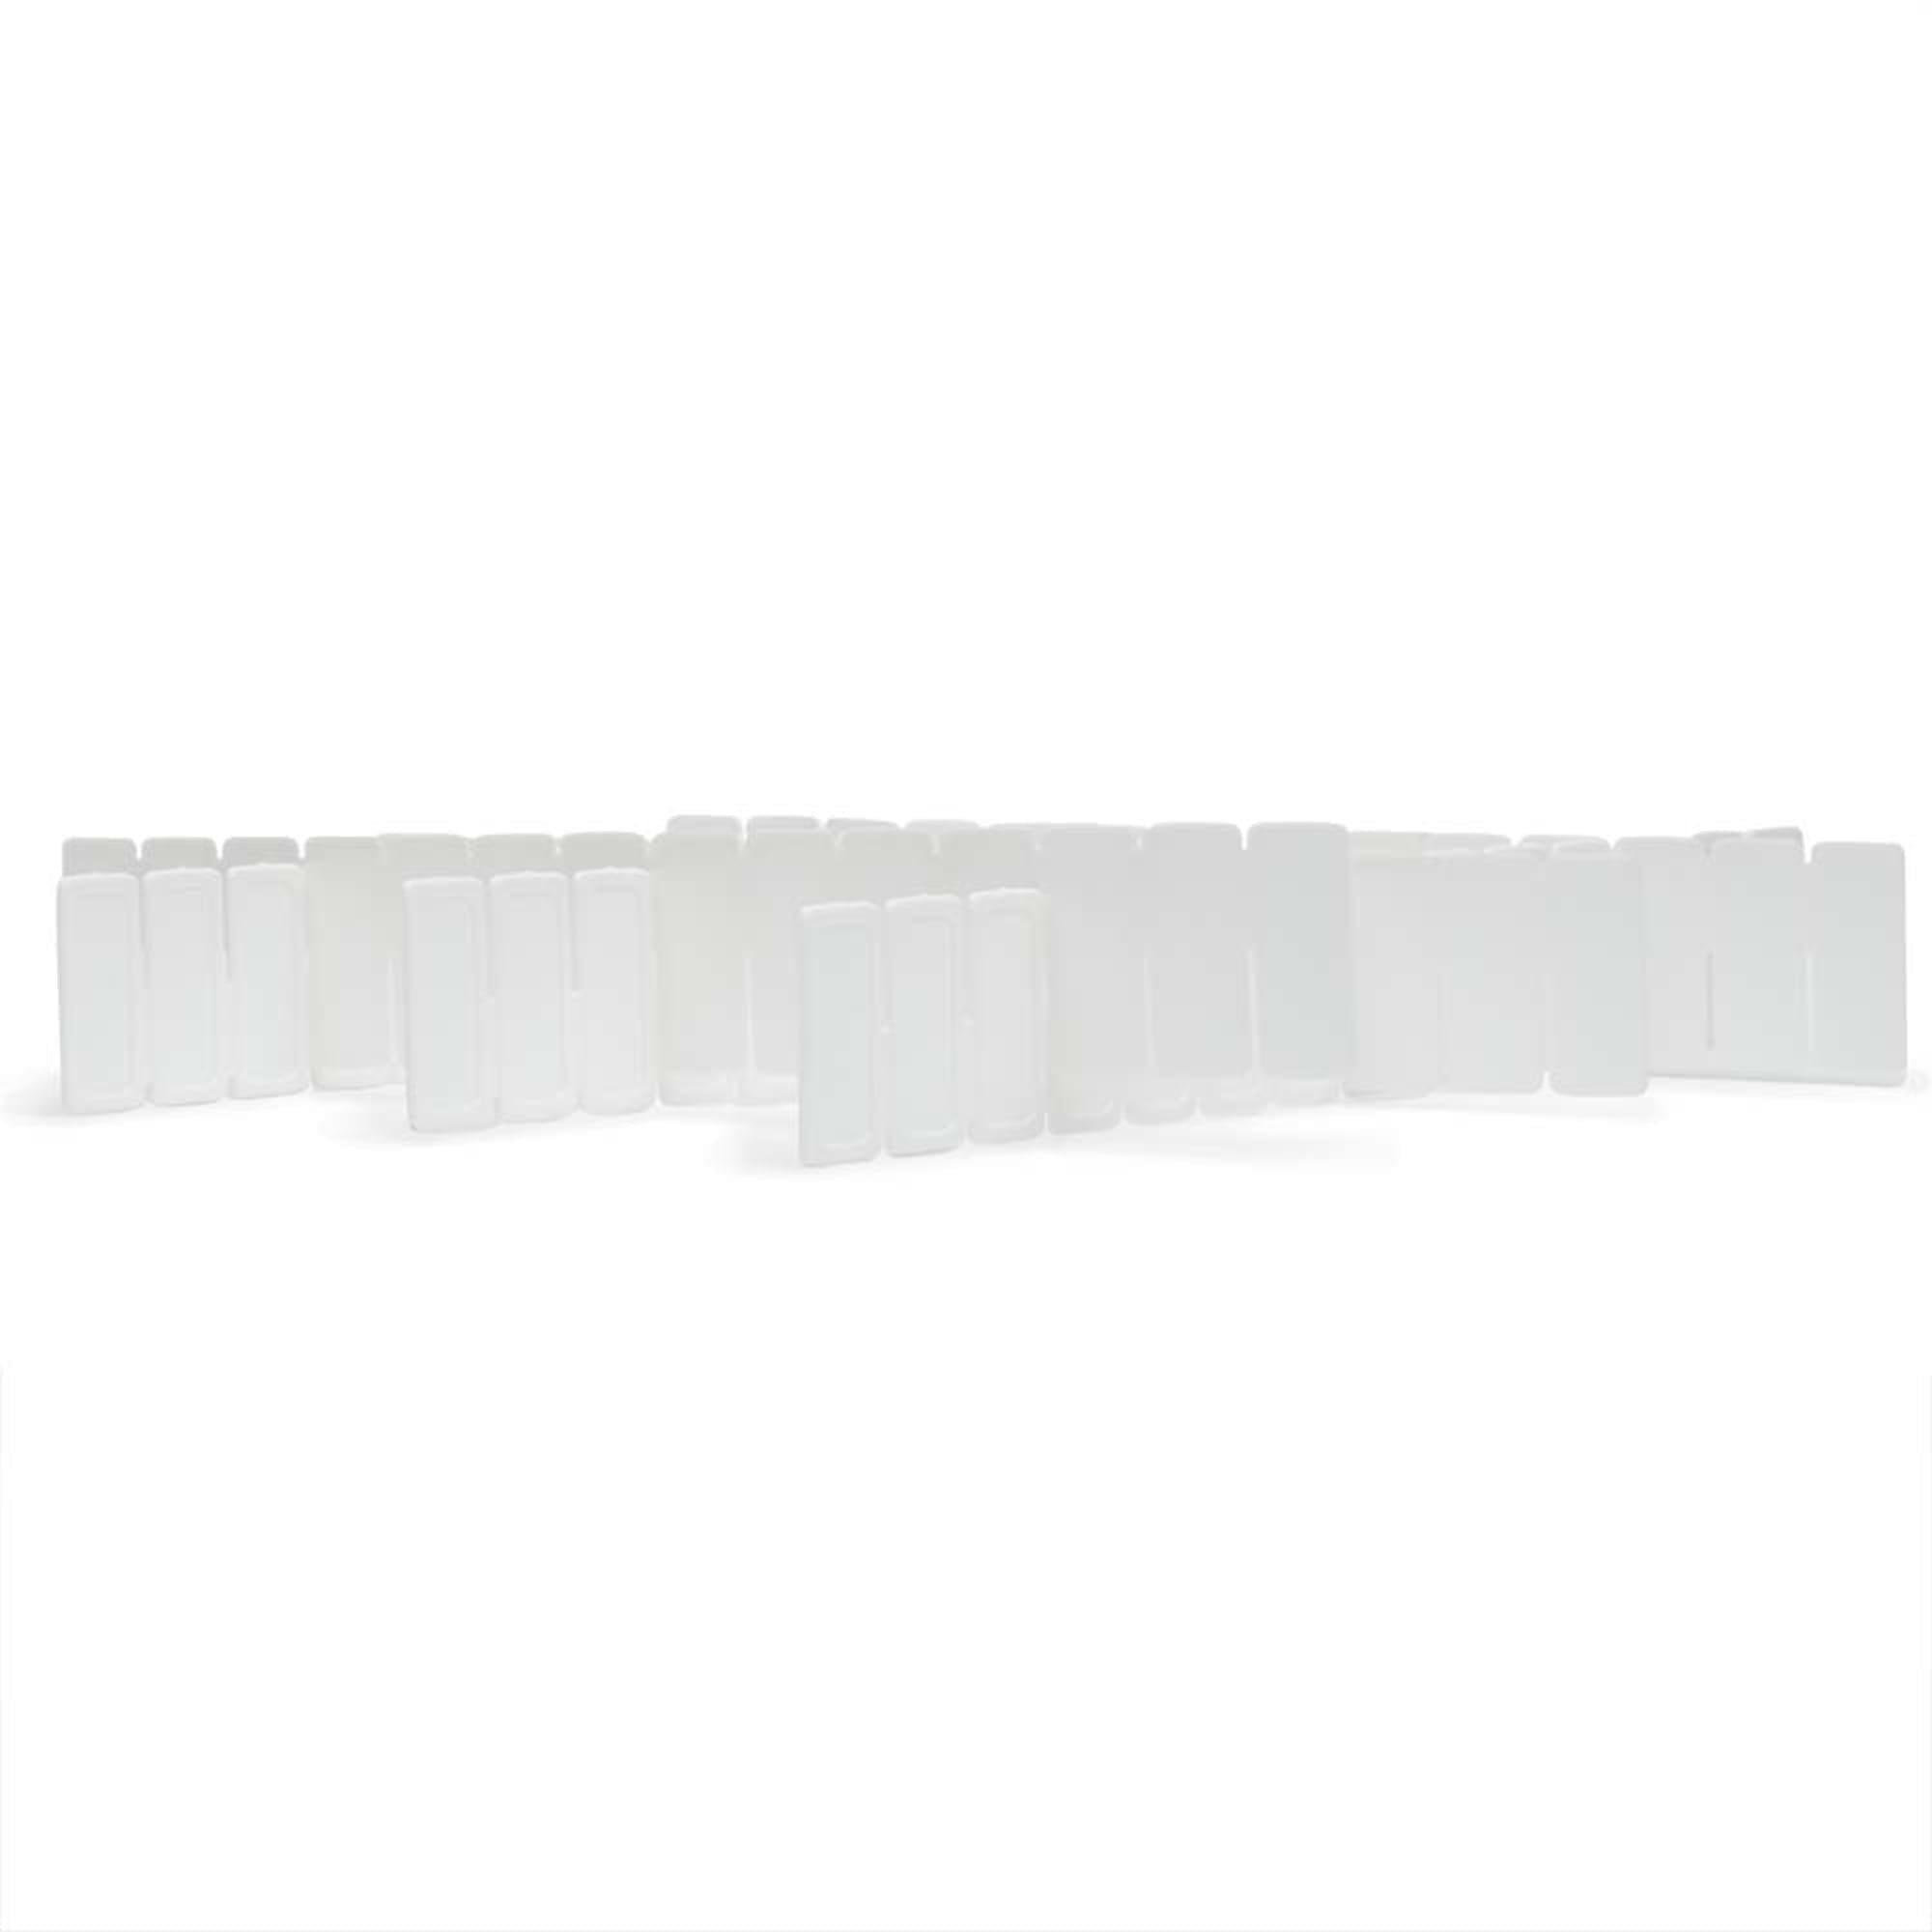 Home Basics 6-Piece Drawer Organizers, White $3.00 EACH, CASE PACK OF 20